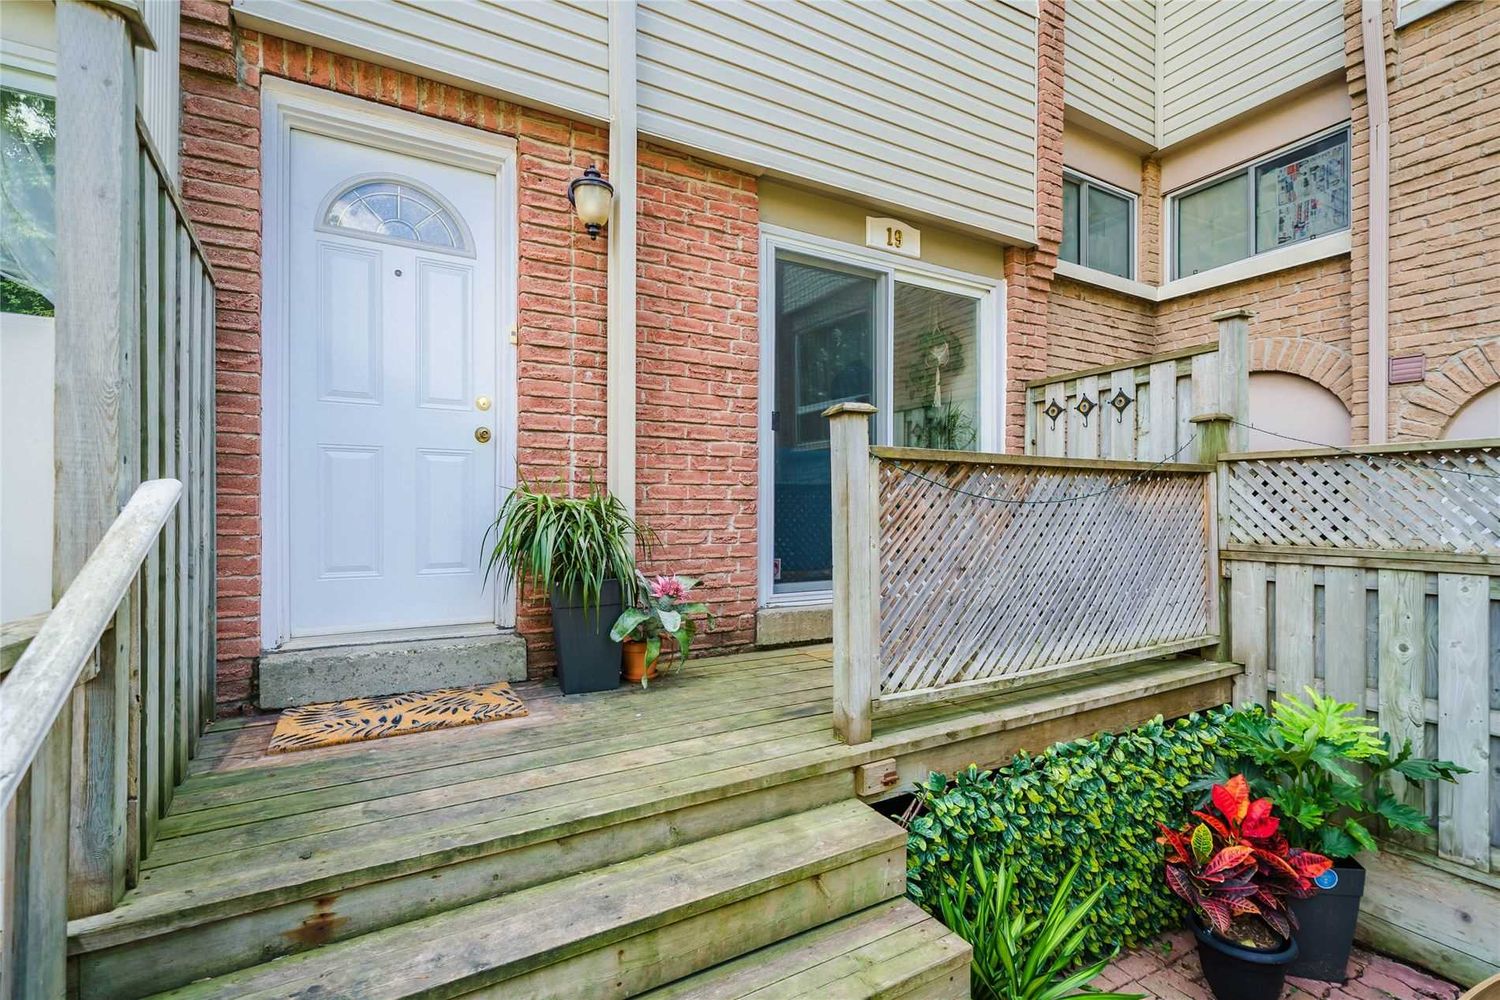 1666 Queen Street E. 1666 Queen St East Townhomes is located in  East End, Toronto - image #2 of 3